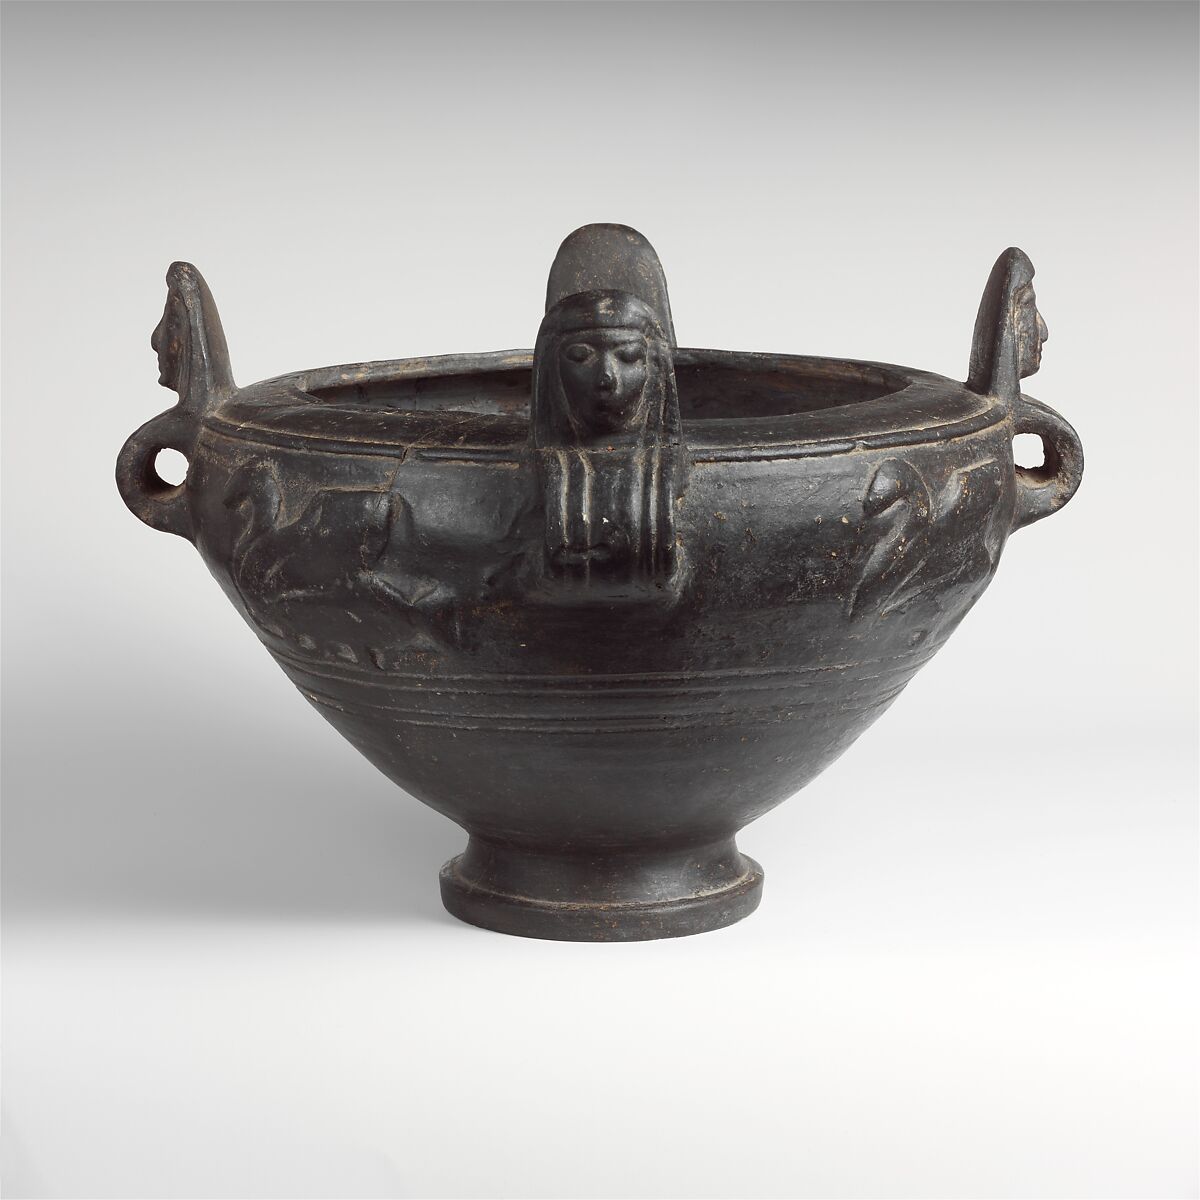 Terracotta bowl with lid, Terracotta, Etruscan 